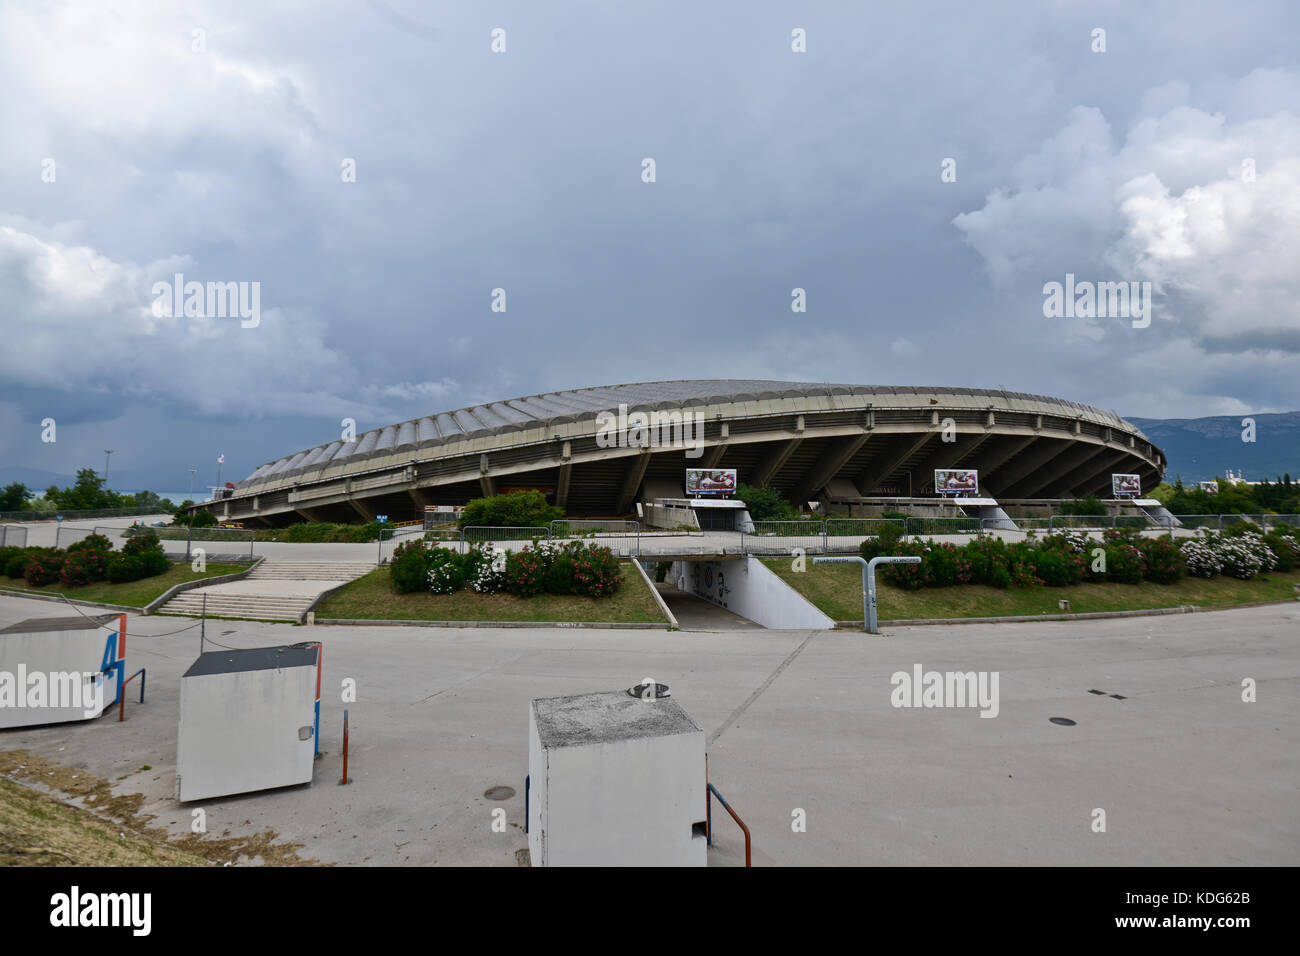 Stadion poljud split hi-res stock photography and images - Alamy